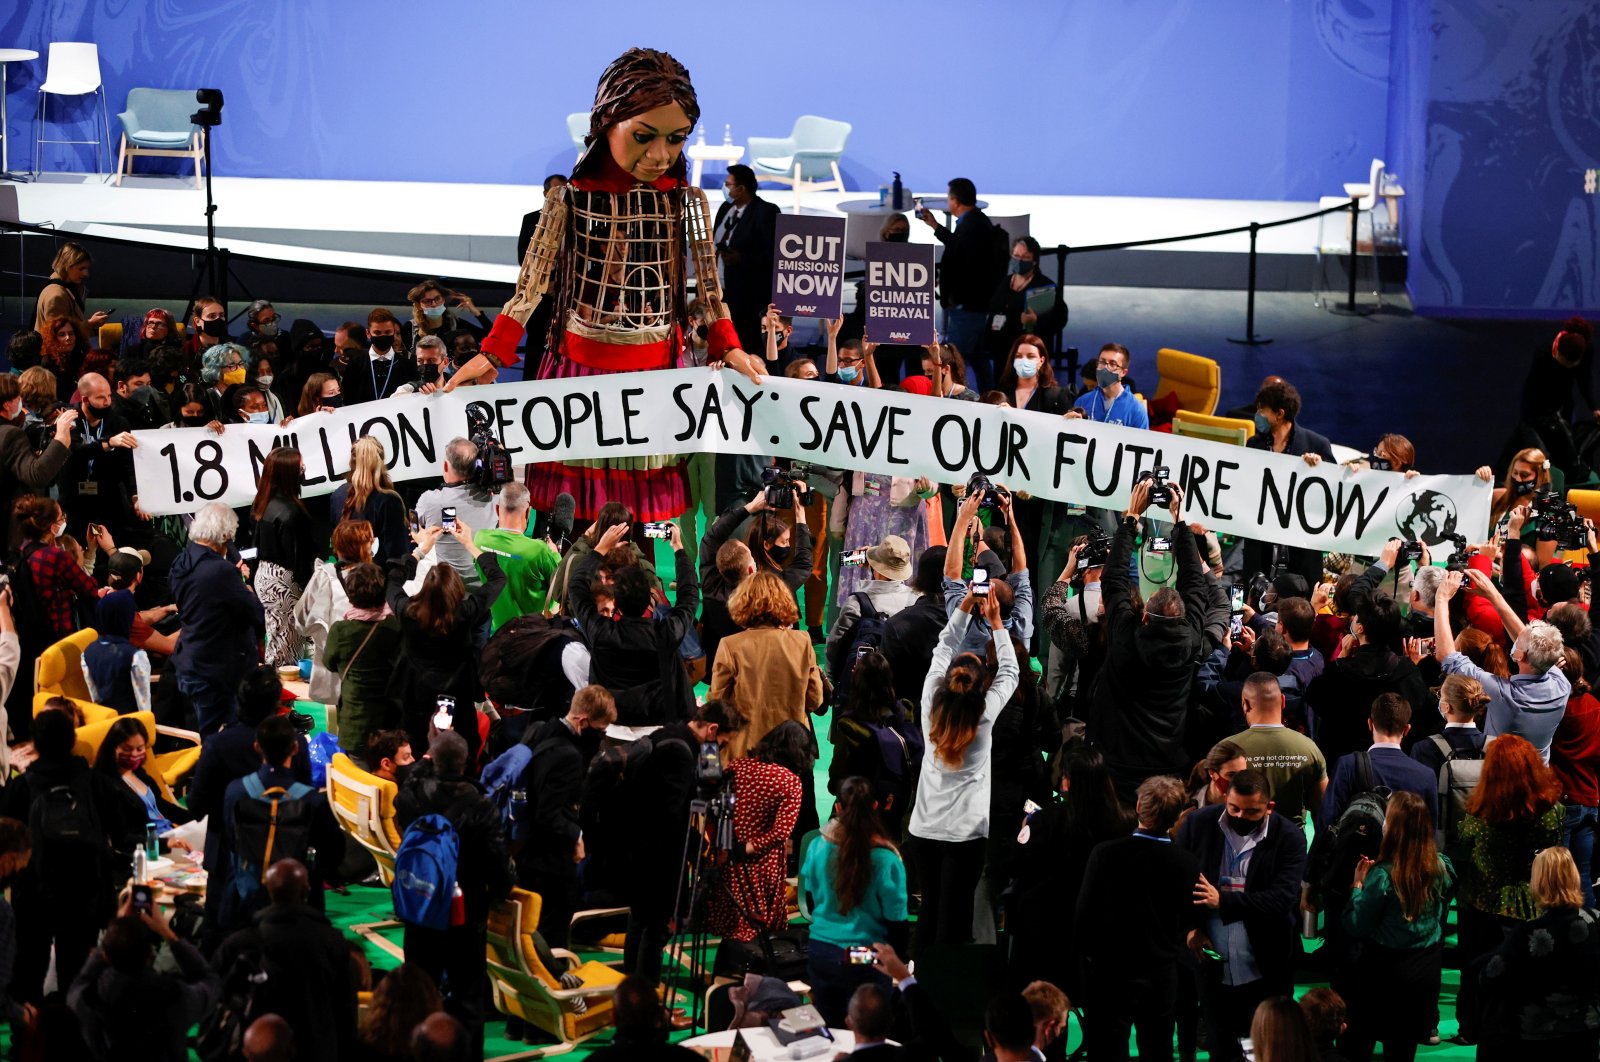 People gather around "Little Amal," a 3.5-meter tall puppet of a young Syrian refugee girl, during the U.N. Climate Change Conference (COP26) in Glasgow, Scotland, Britain, Nov. 9, 2021. (Reuters Photo)